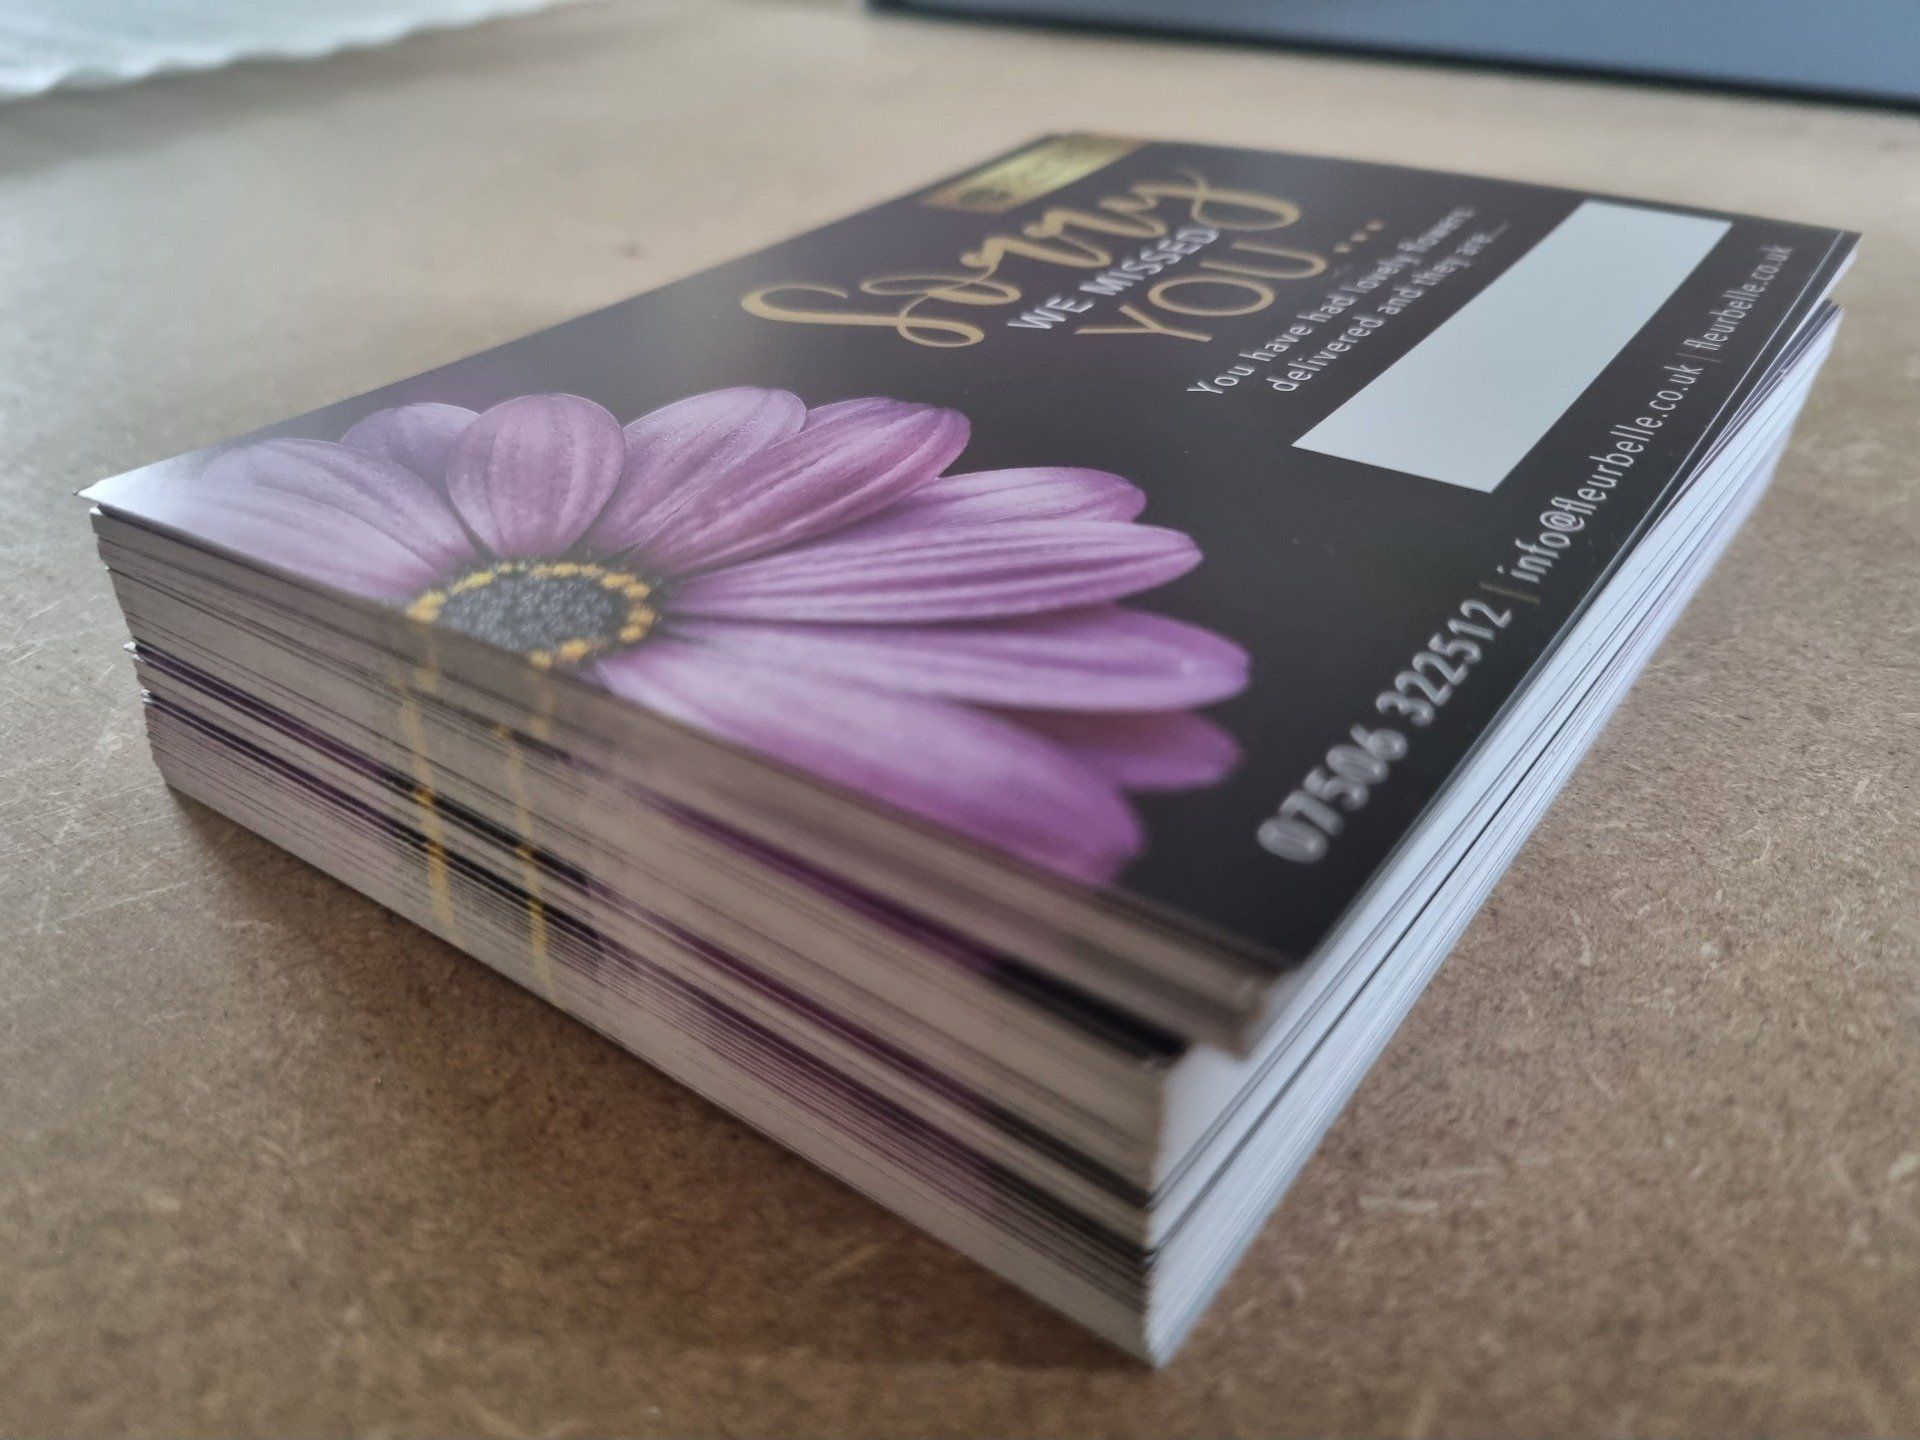 Leaflets are visually appealing and contain useful information about your business or product